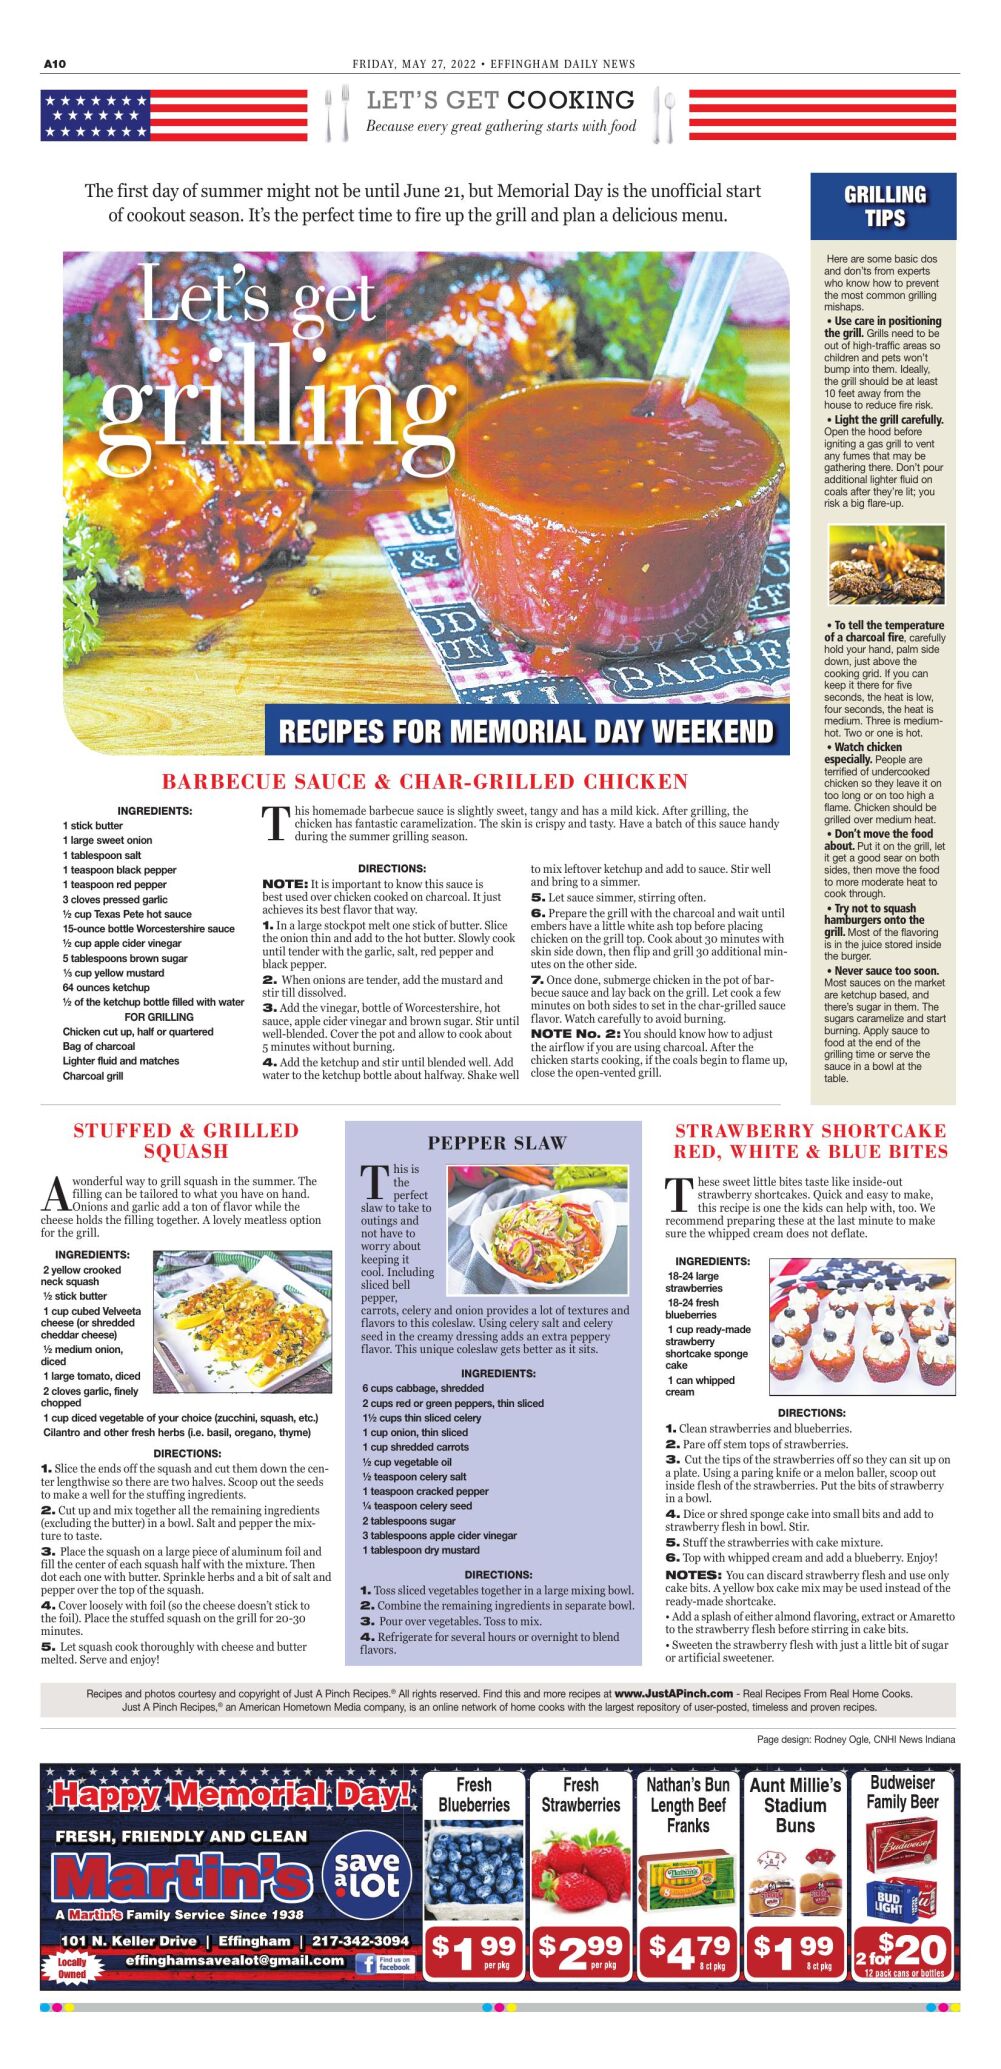 GRAPHIC: Memorial Day cooking